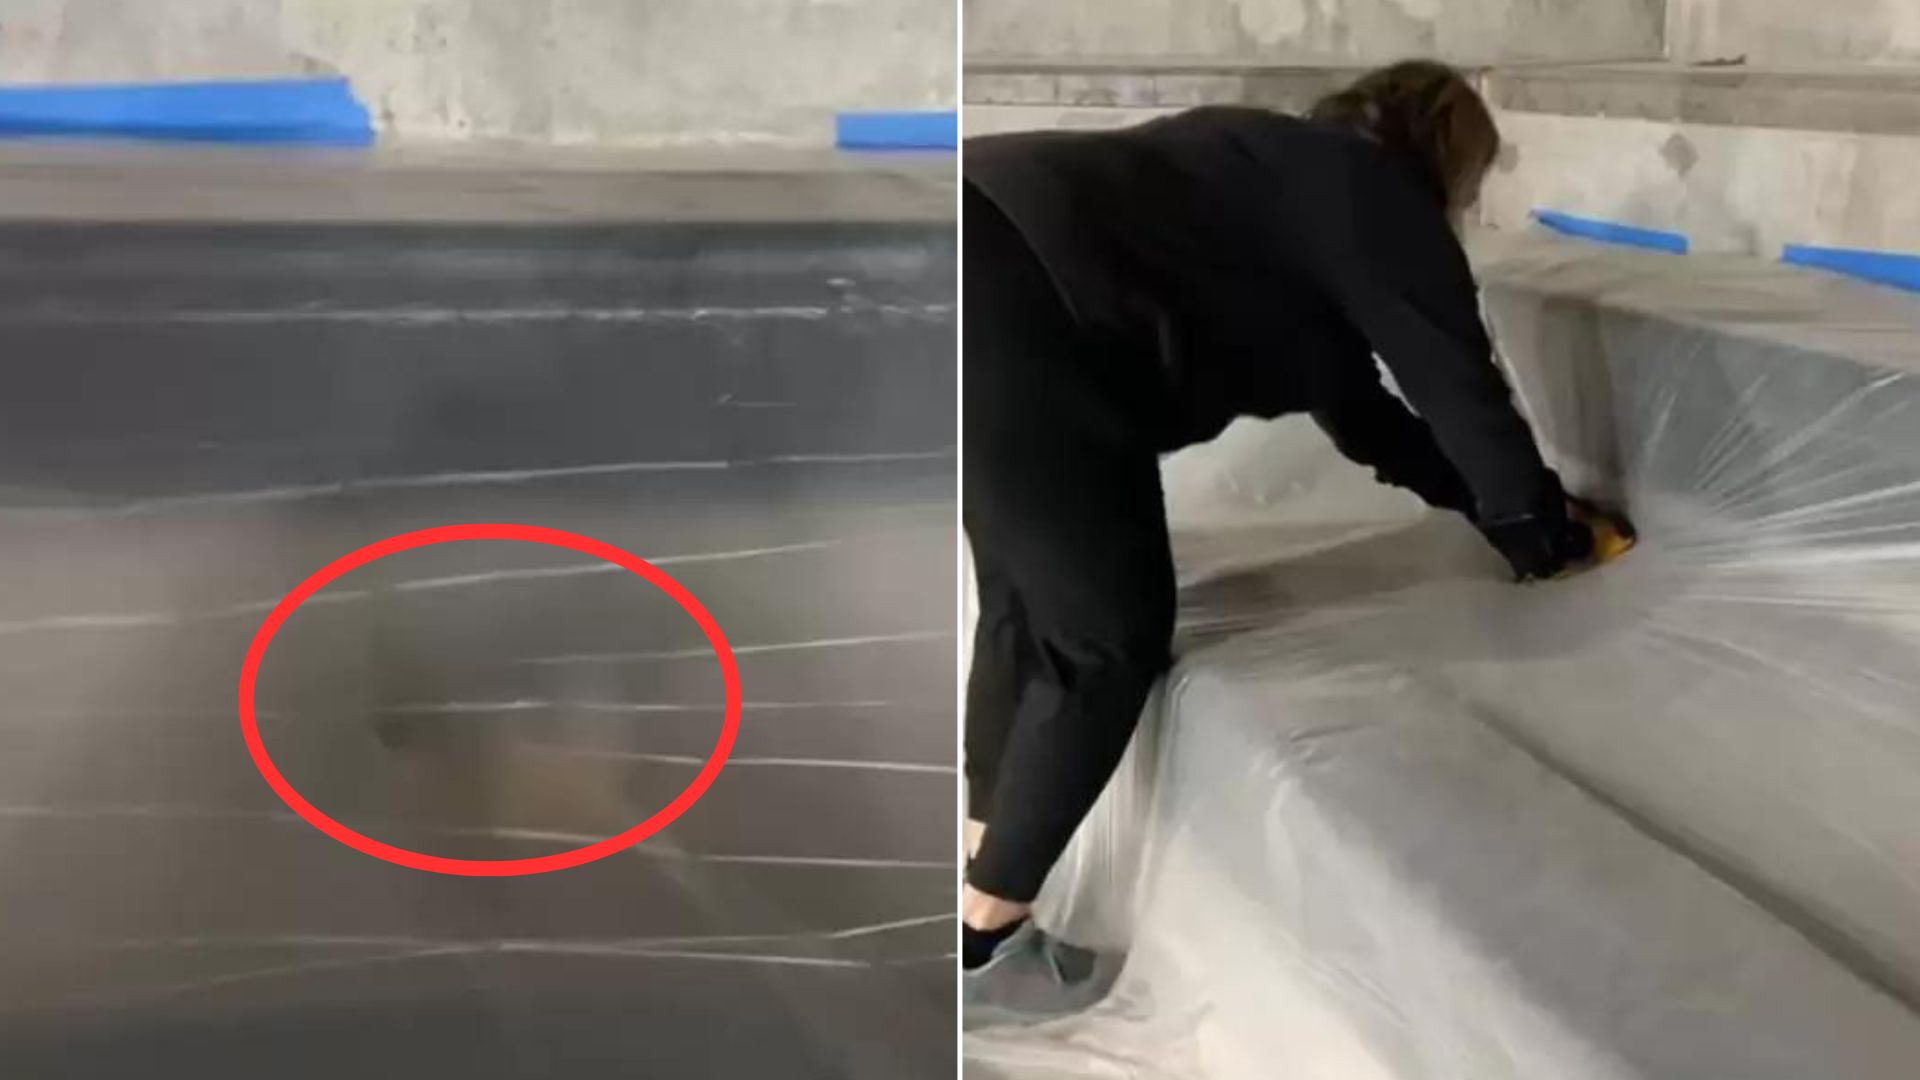 Construction Workers Were Shocked When They Saw A Shadowy Figure Moving Under Tarp